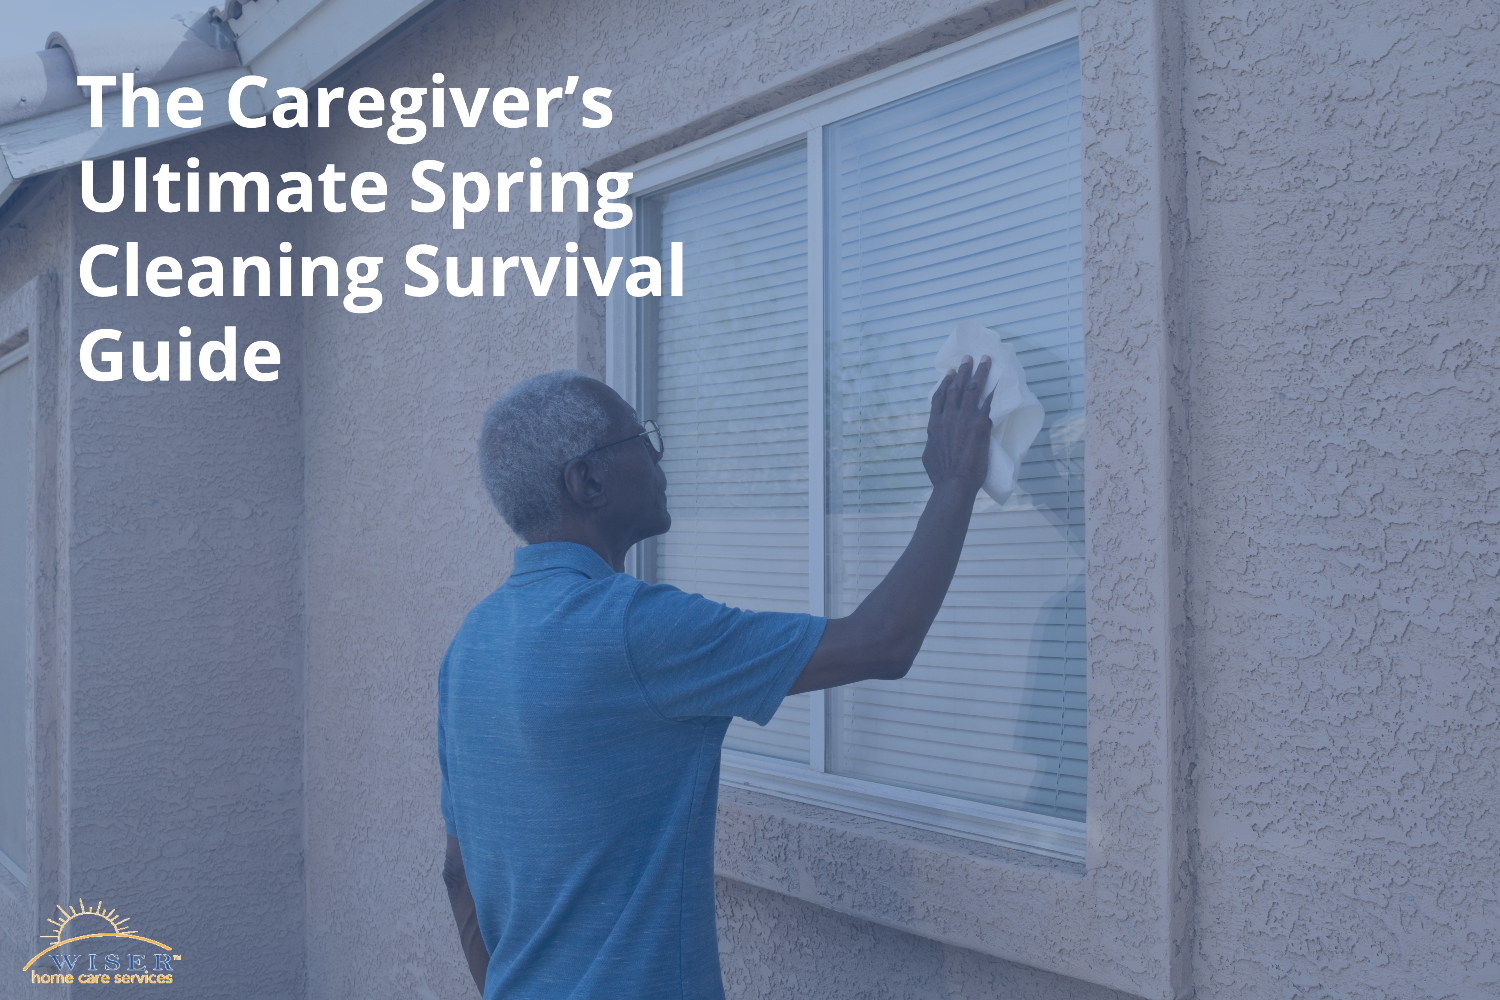 The Caregiver’s Ultimate Spring Cleaning Survival Guide